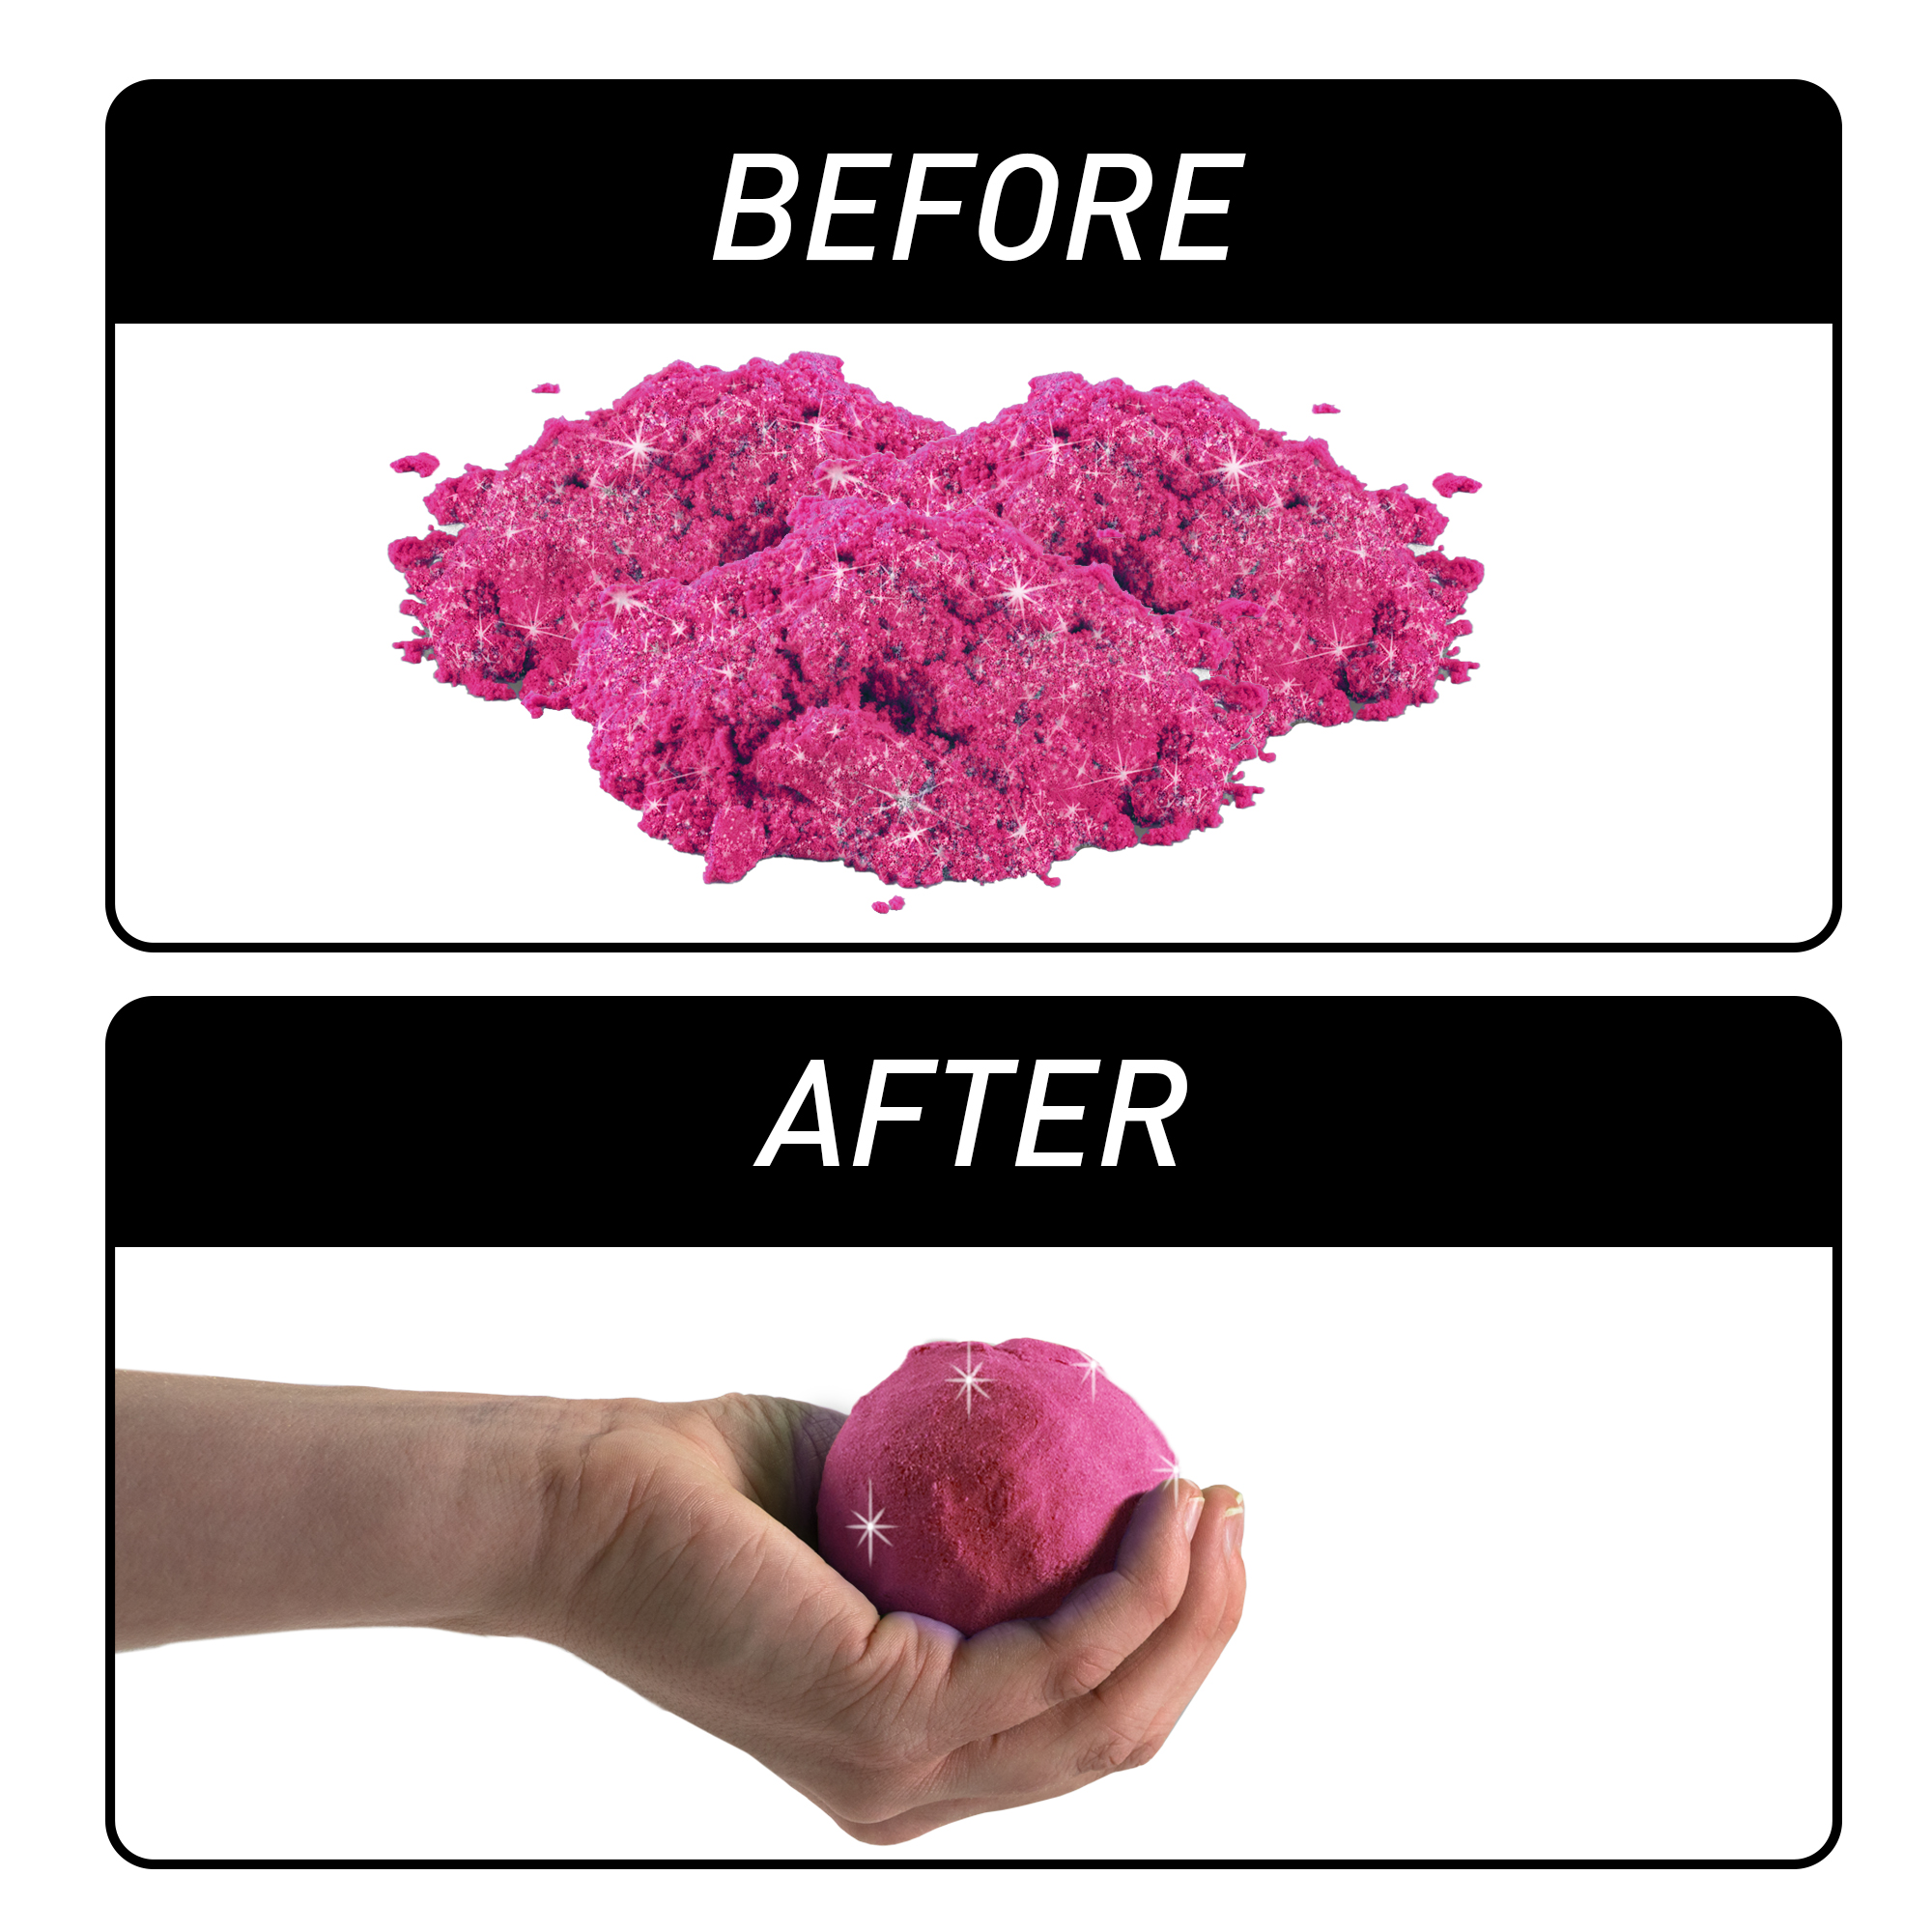 National Geographic Play Sand - 2 lbs of Sand with Castle Molds (Sparkling Pink) - A Fun Sensory Sand Activity - image 4 of 7